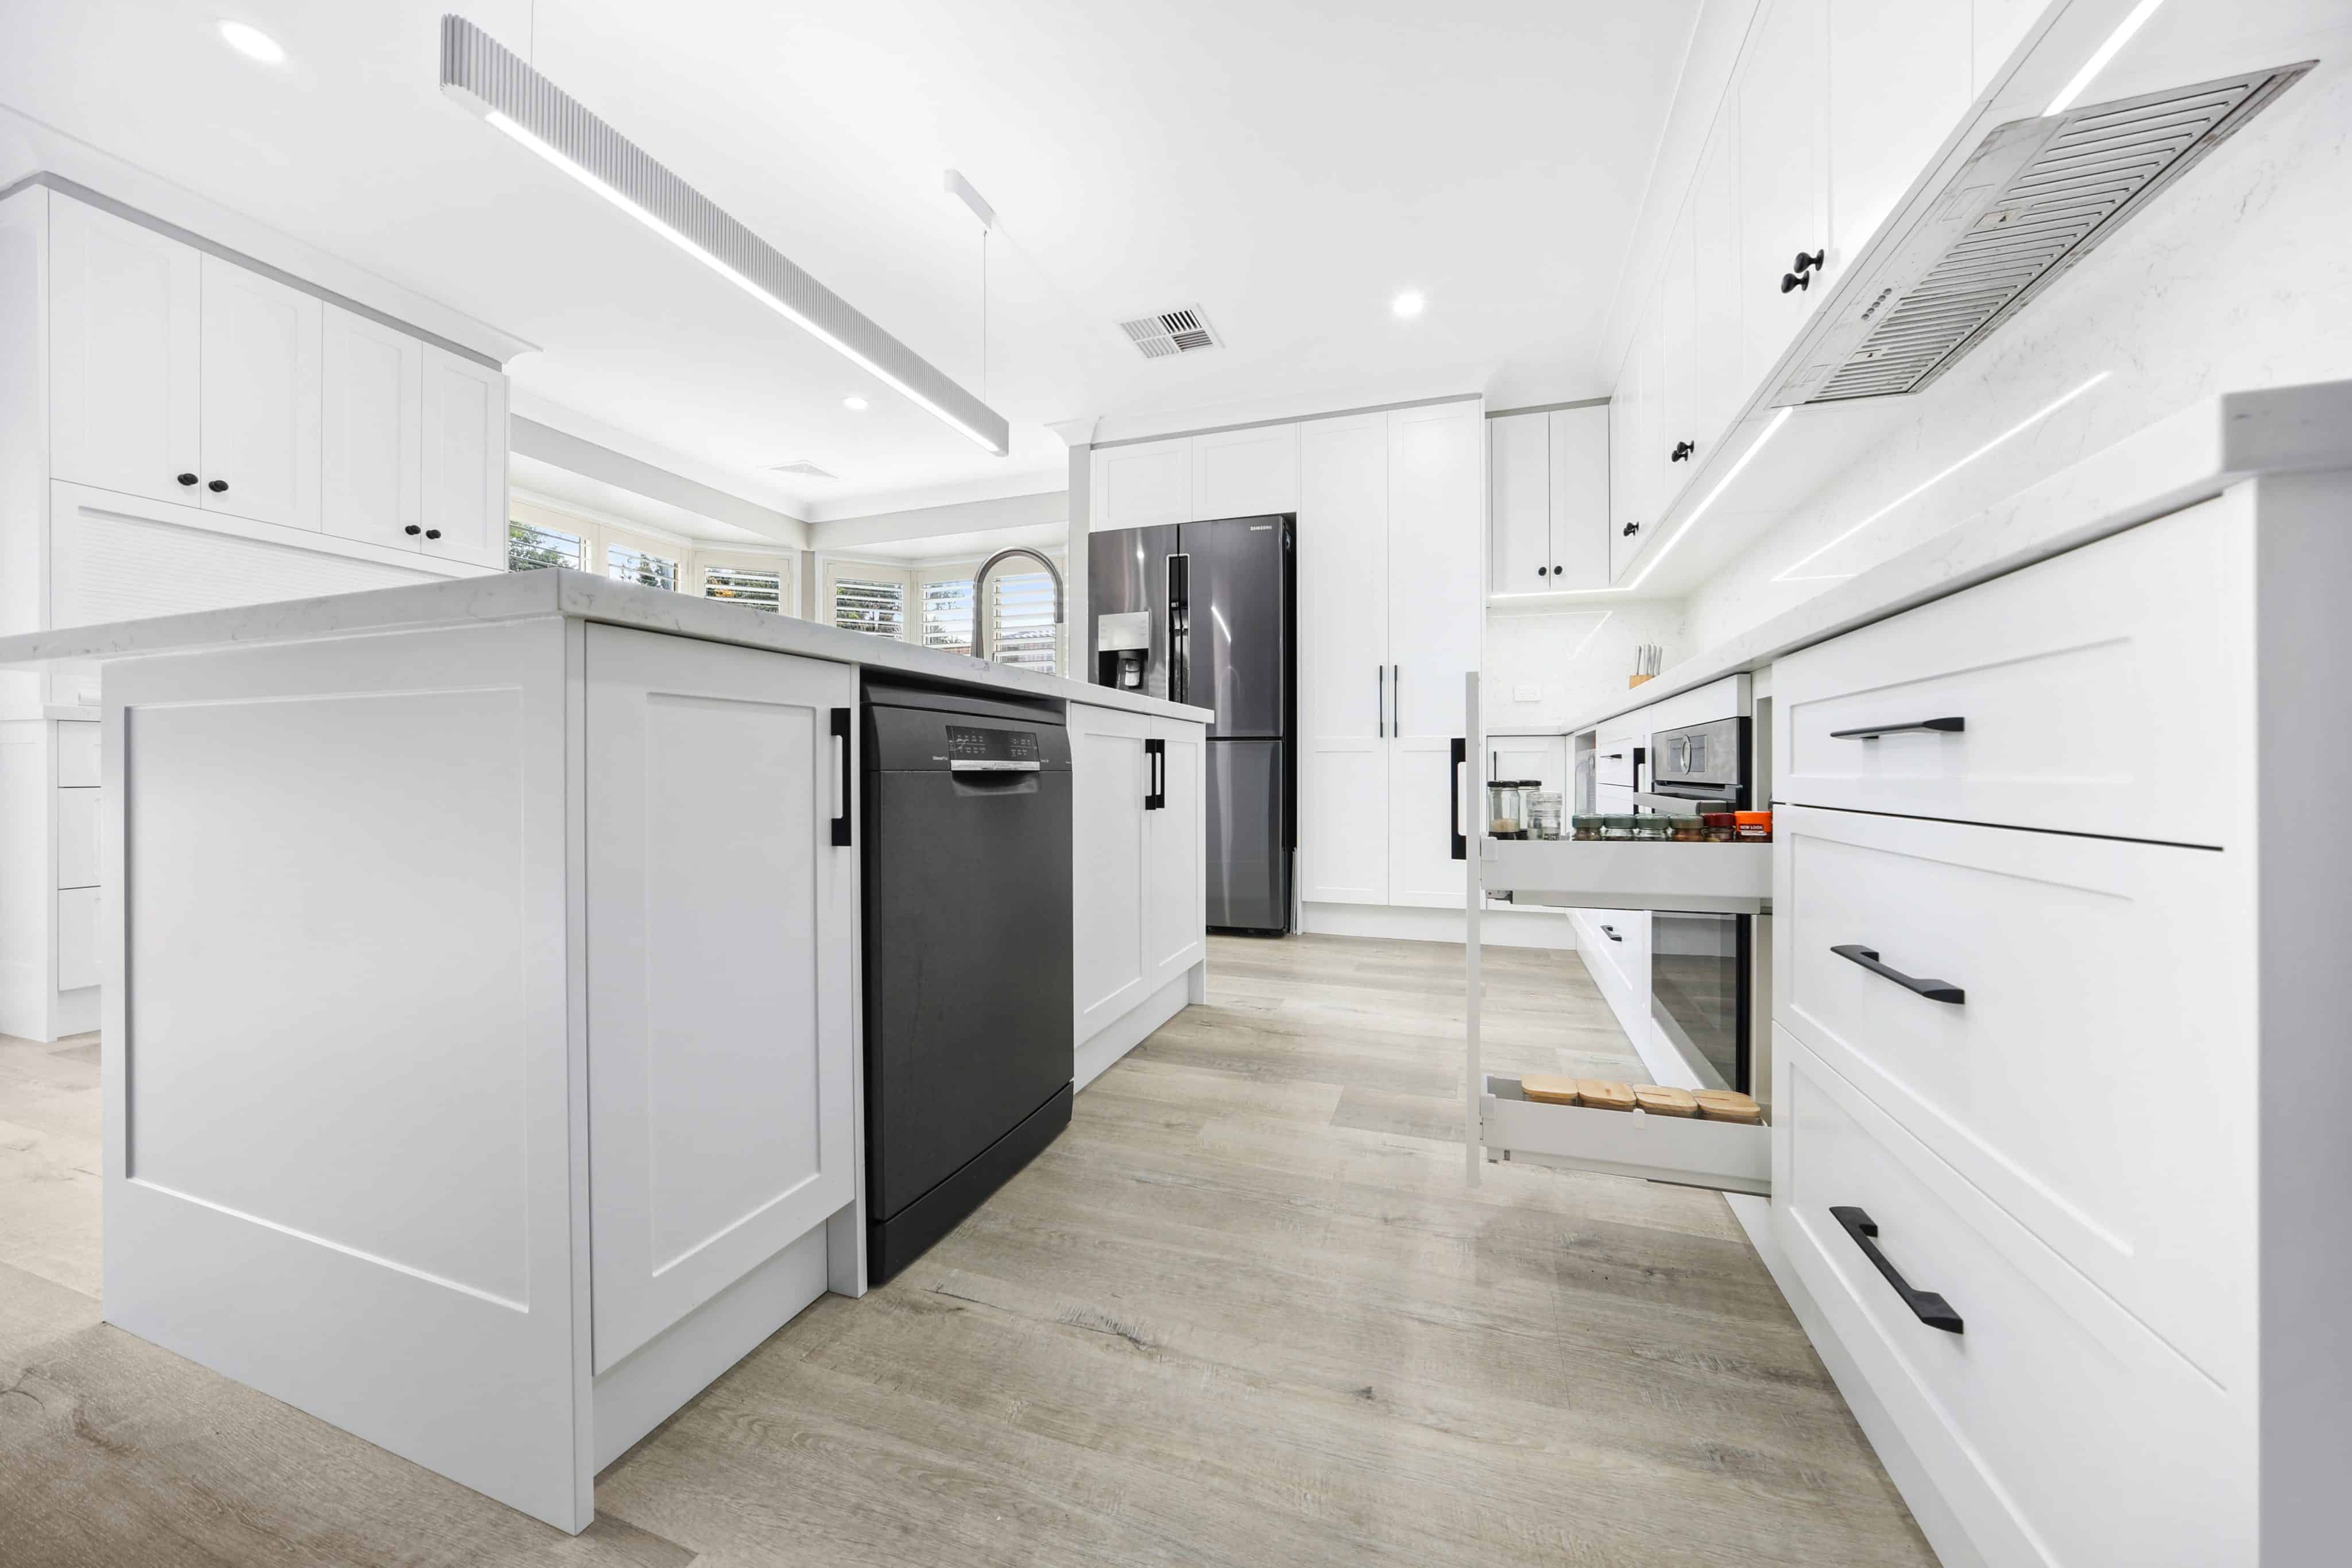 This is a range of hampton style kitchens after renovation by AJB Kitchens. Project location is in Kellyville